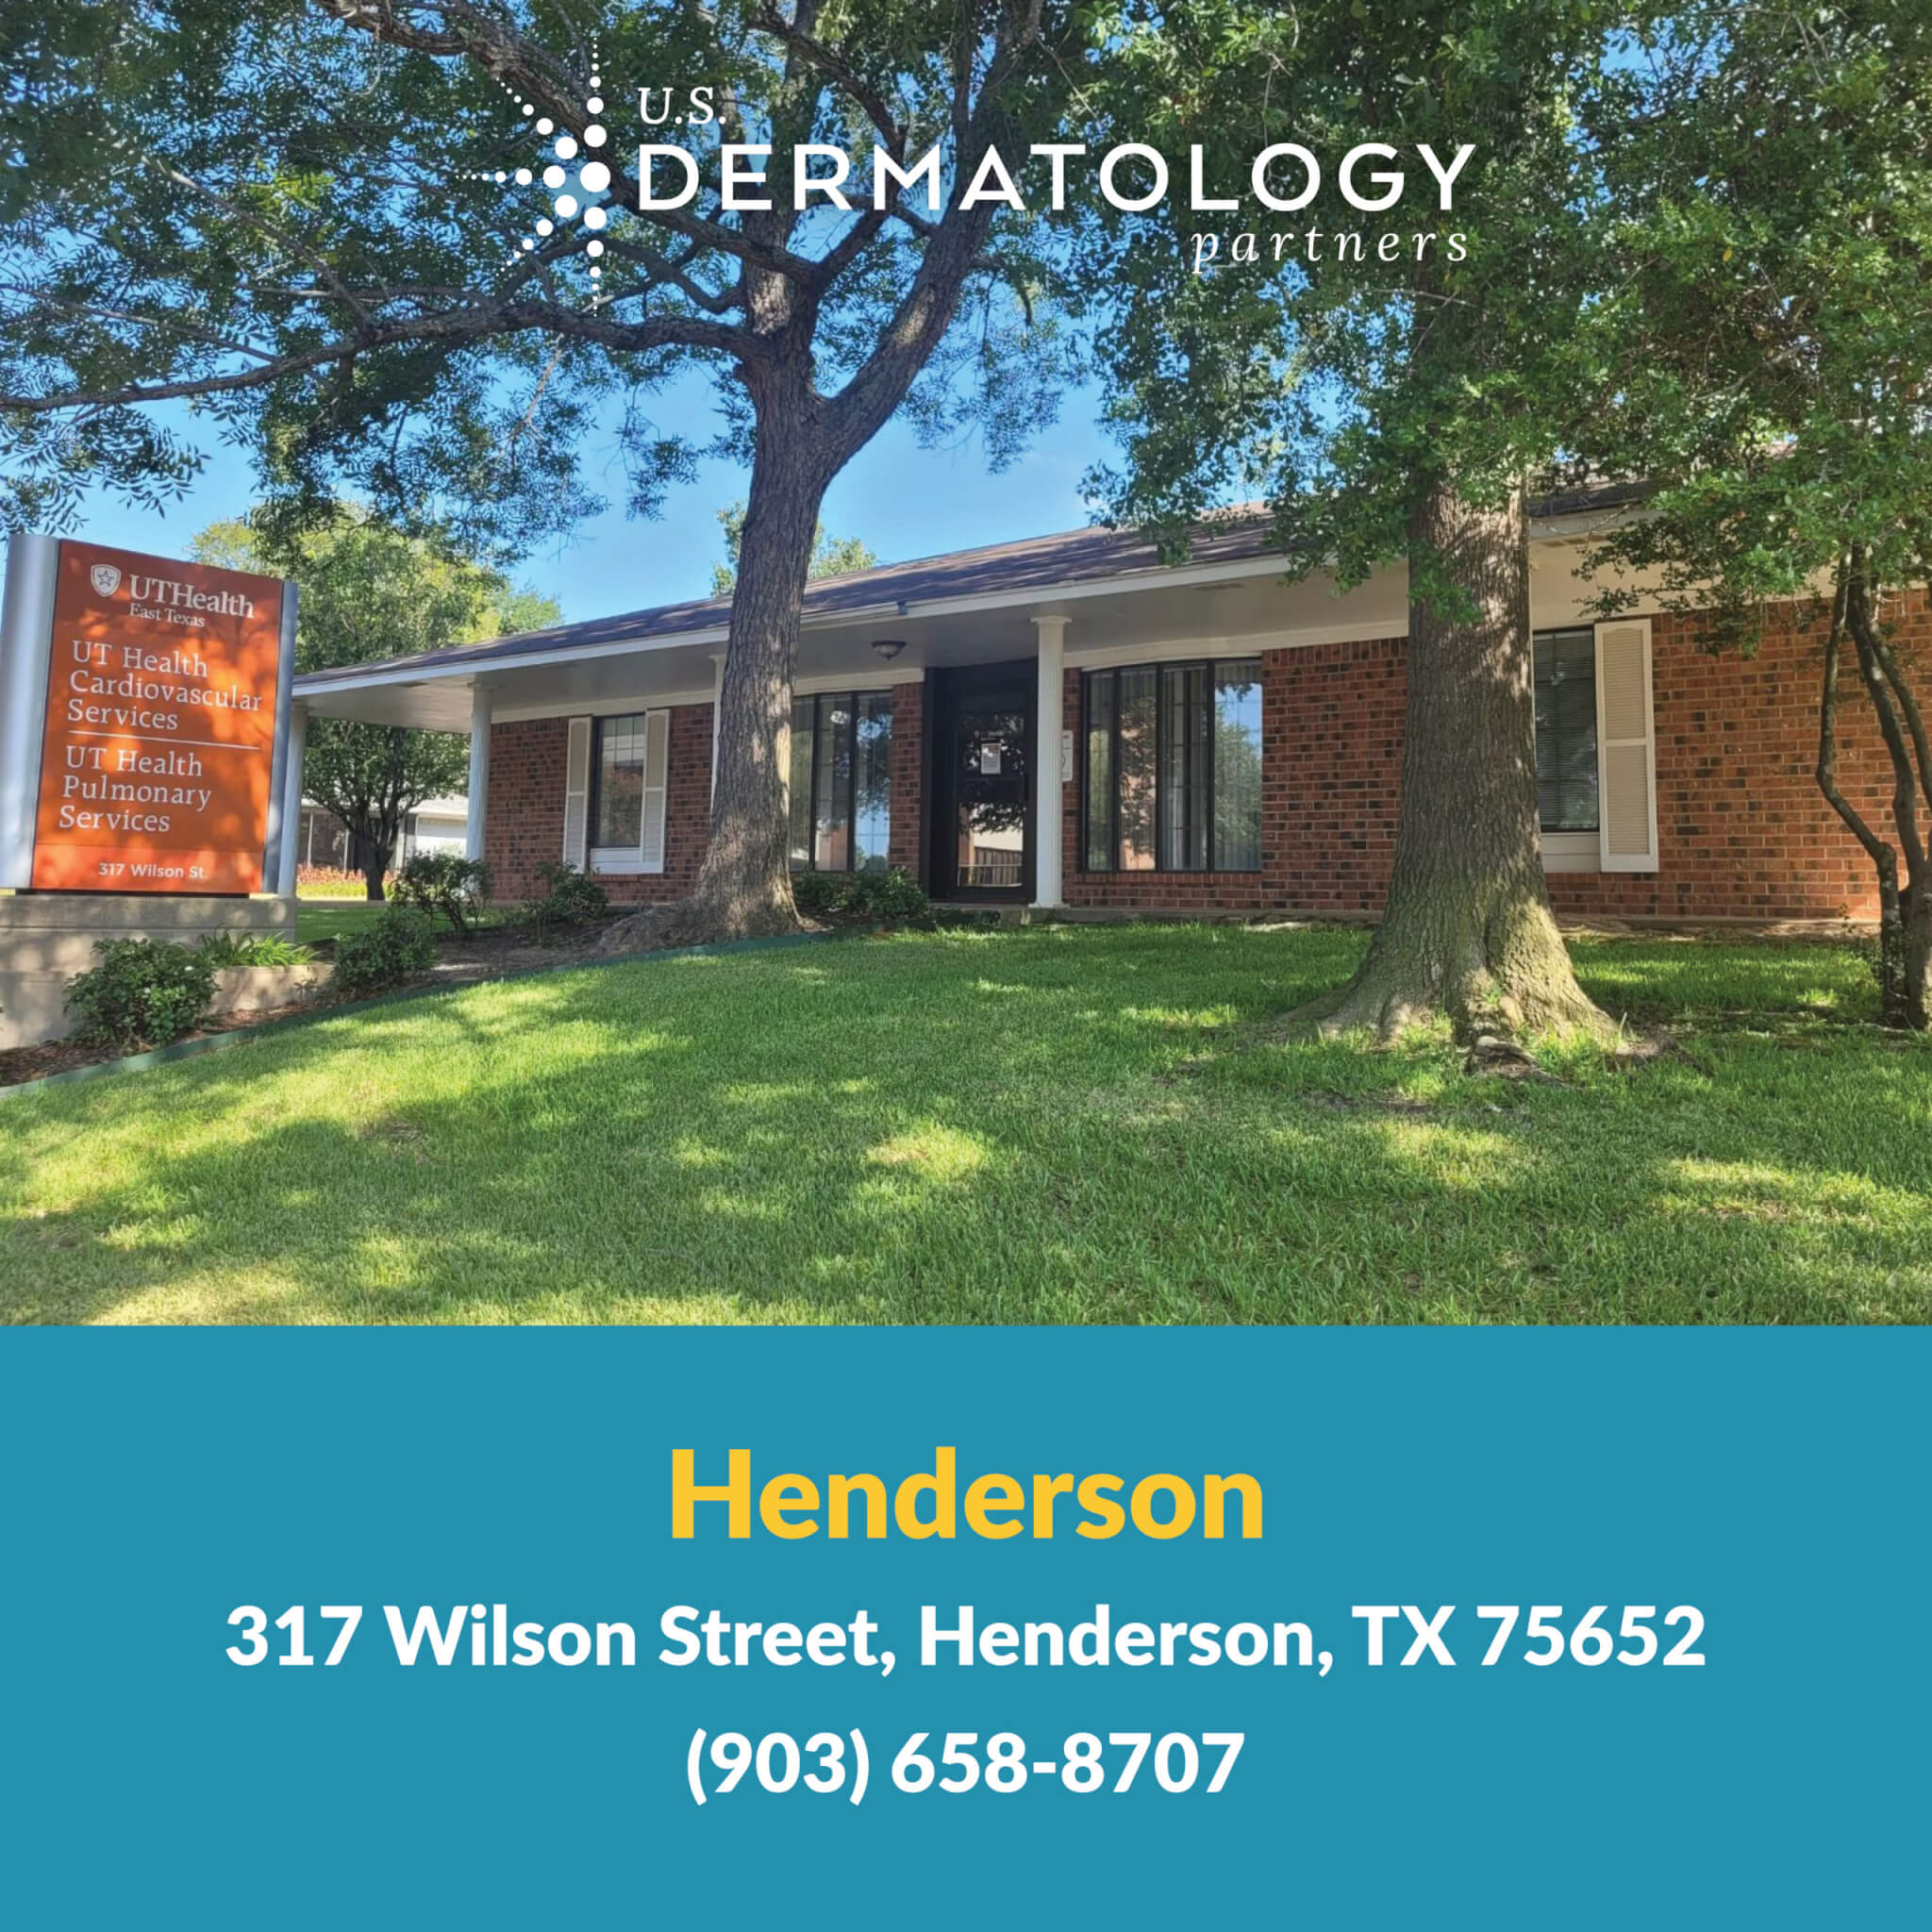 U.S. Dermatology Partners is your specialty Dermatologist in Henderson, TX. We offer skin treatment for acne, psoriasis, eczema & skin cancer.